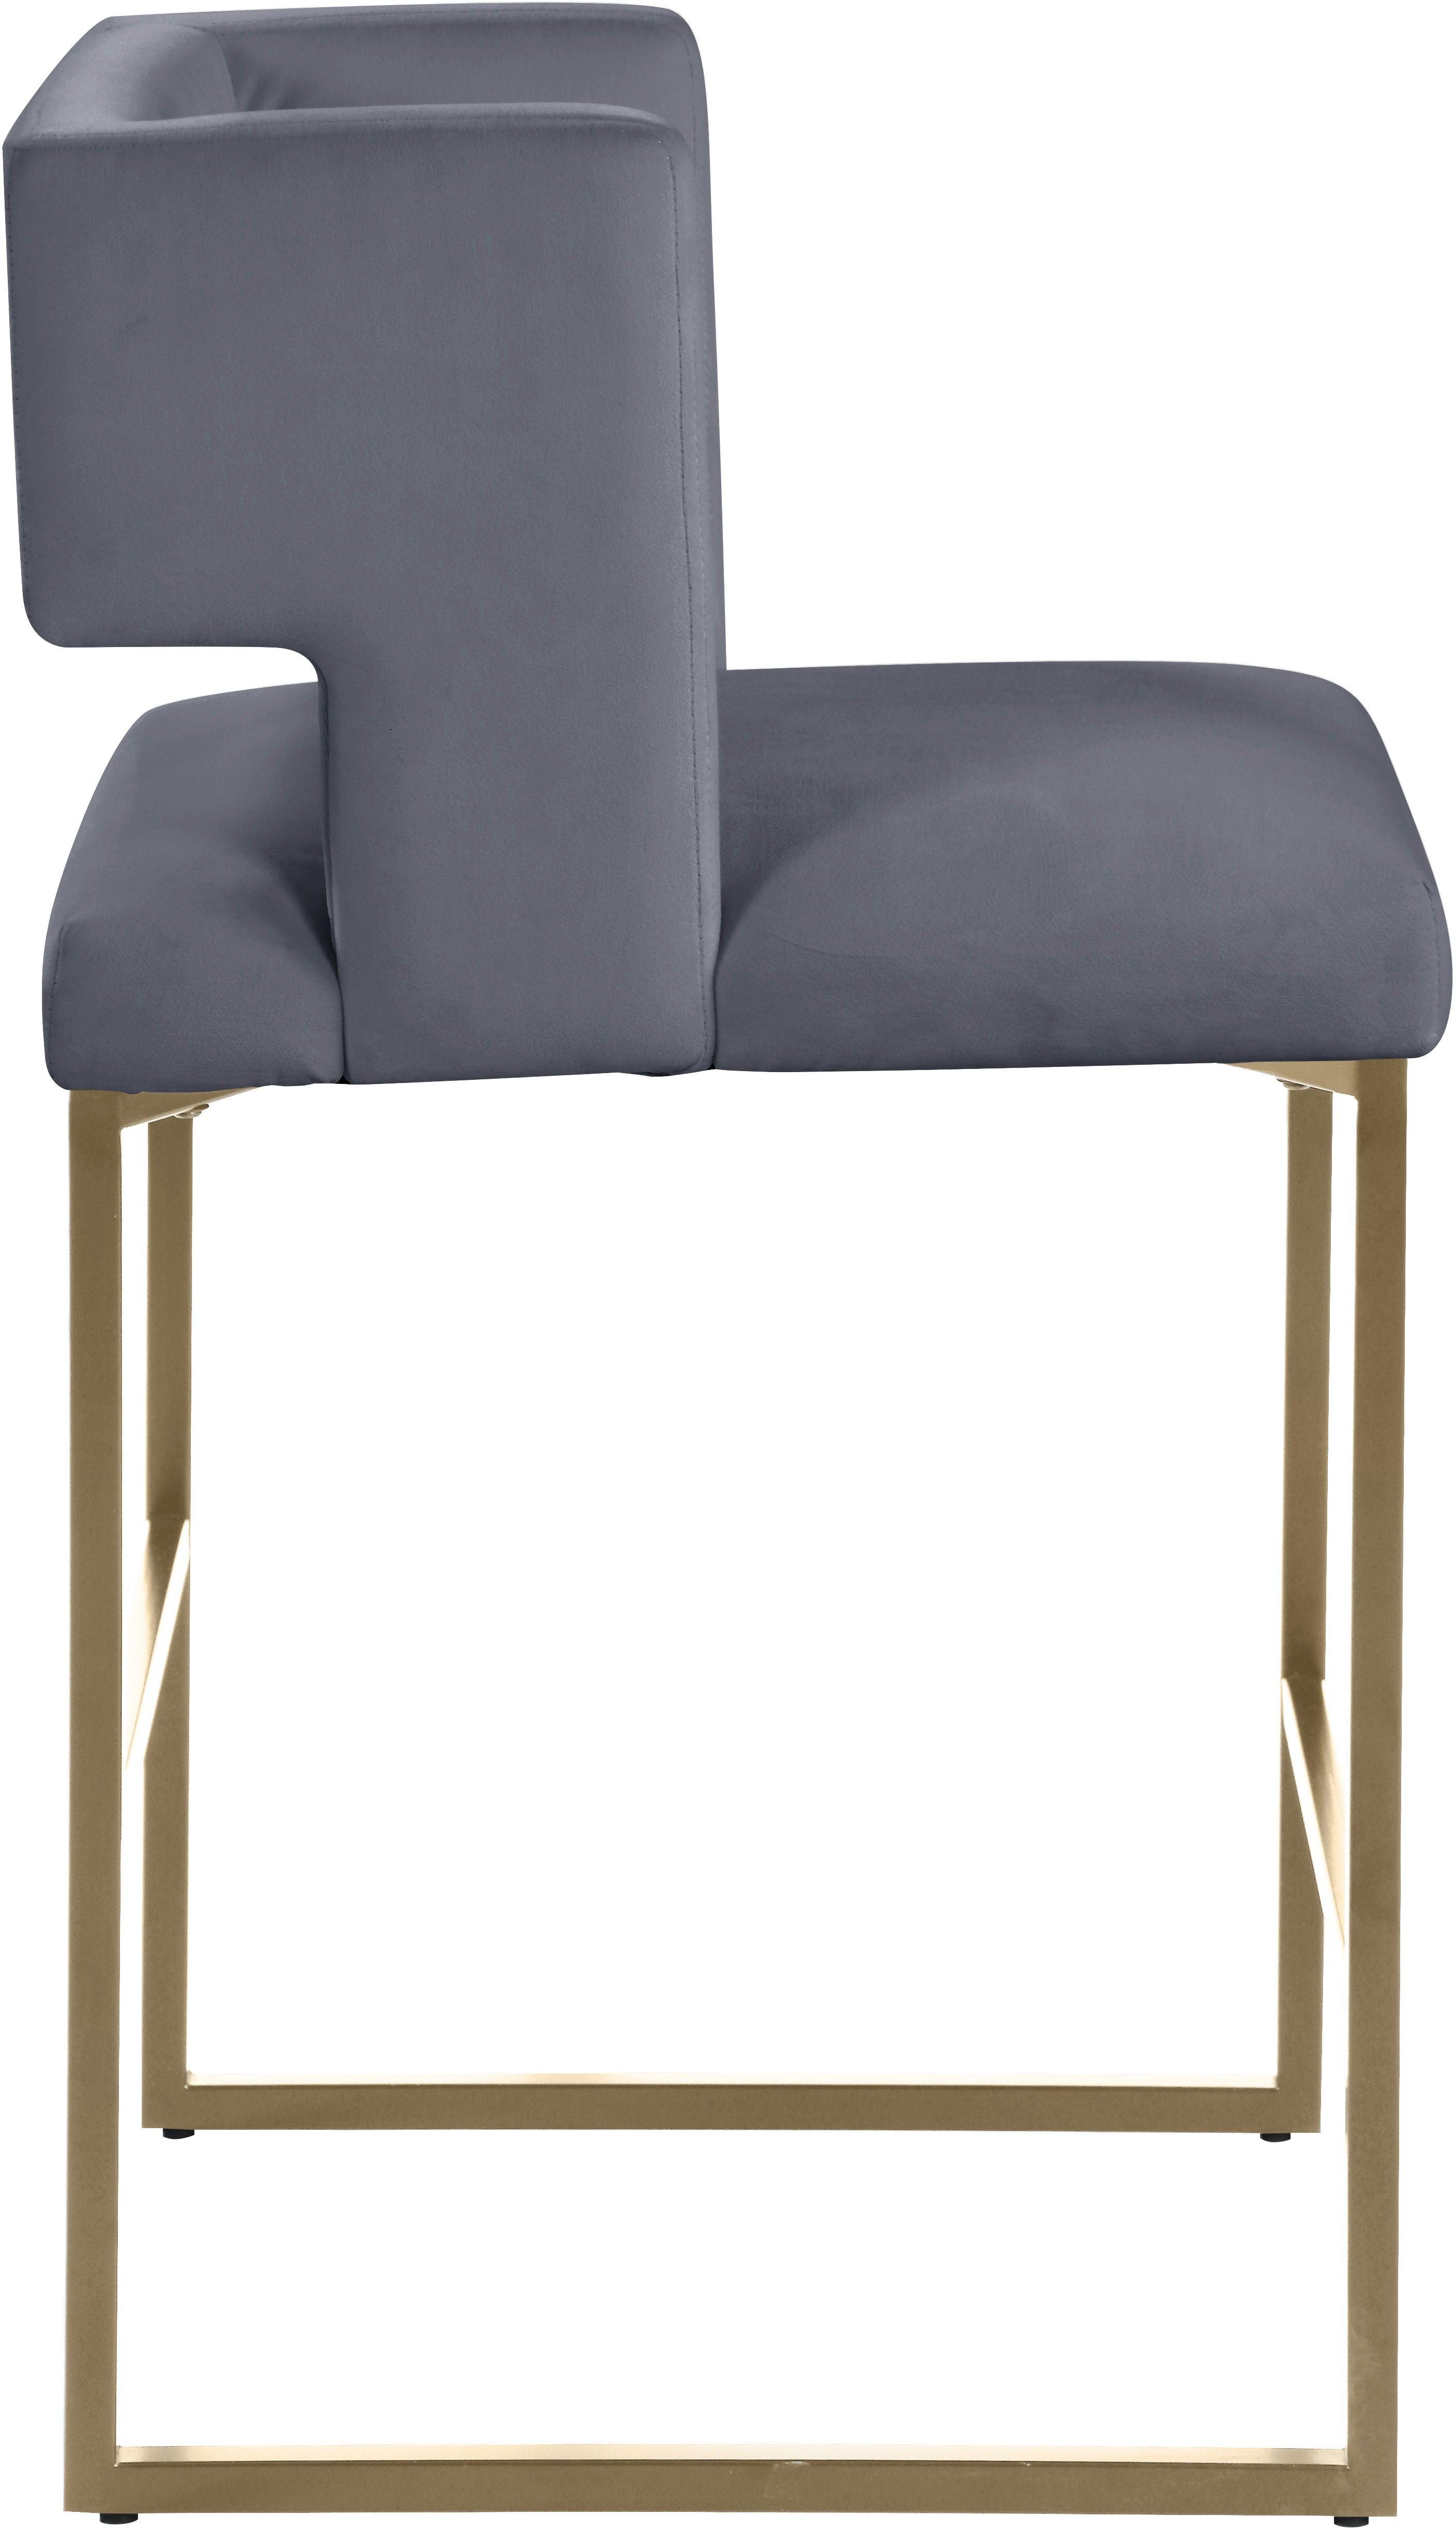 Meridian Furniture - Caleb - Counter Stool with Gold Legs (Set of 2) - 5th Avenue Furniture